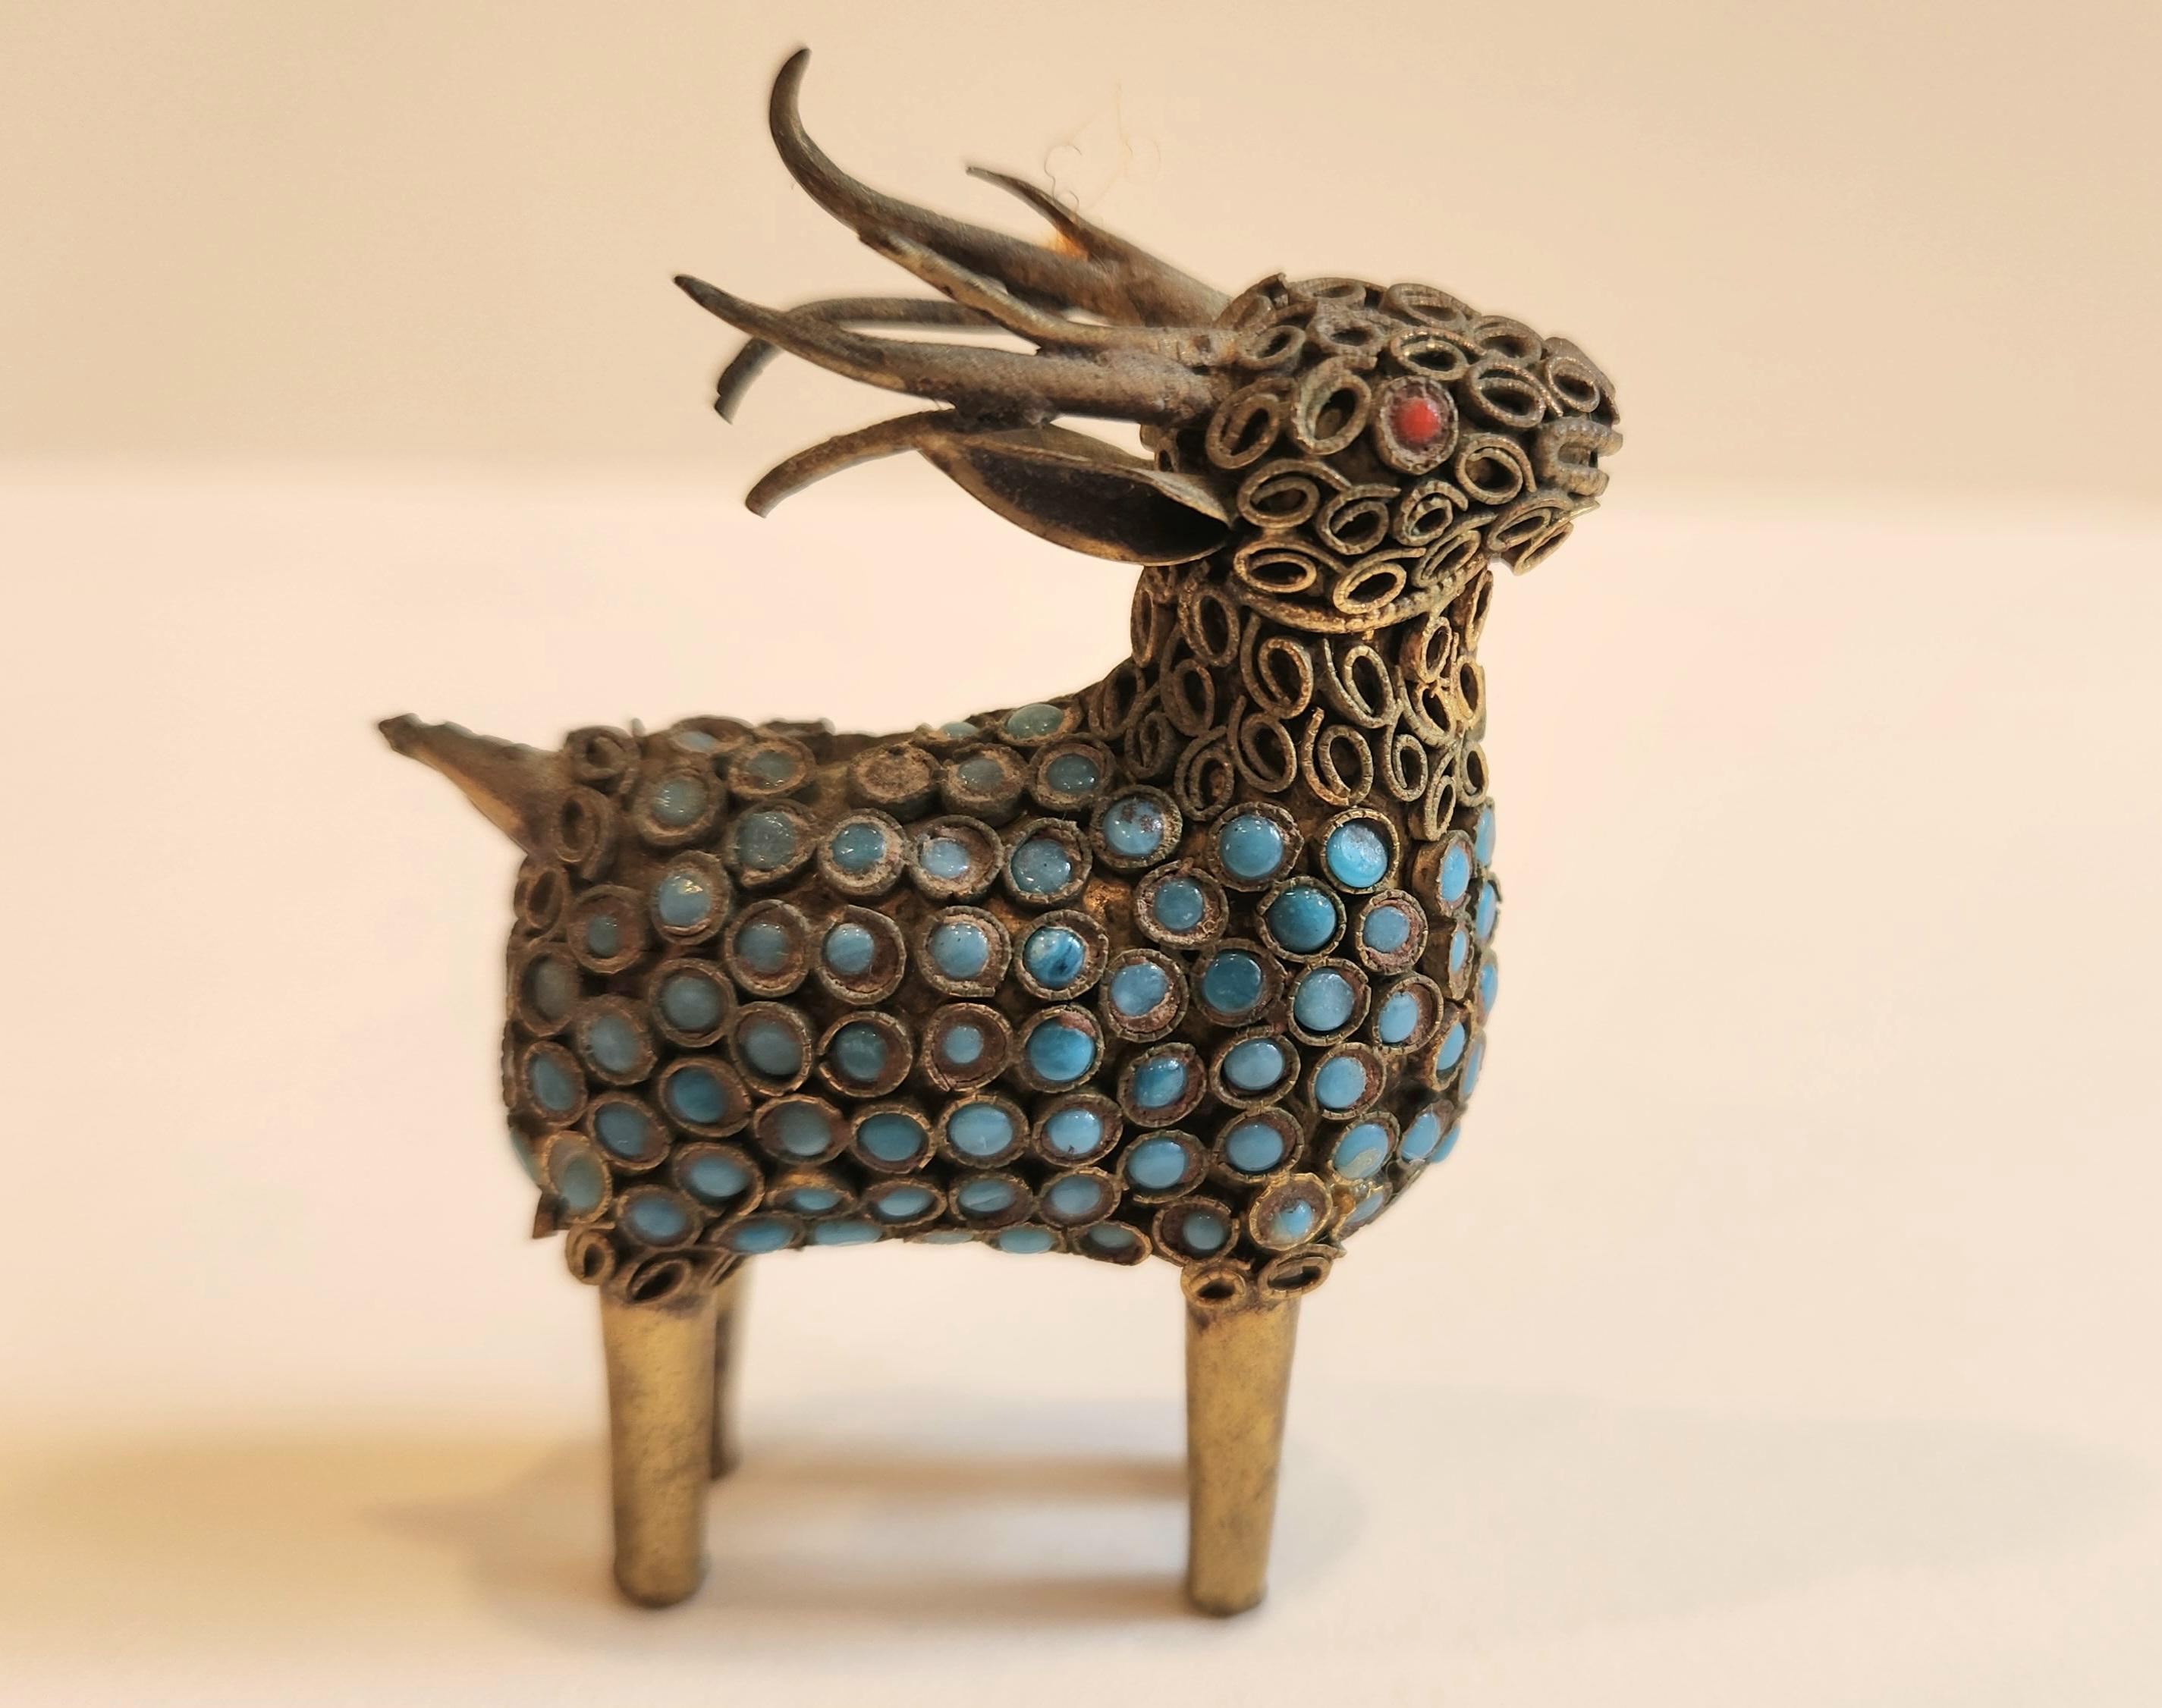 This delicate sculpture from Nepal is intricately with decorated turquoise stones around the body, and two coral stones representing the eyes. The head, neck, and portions of the body of this animal also have small pieces of coiled bronze